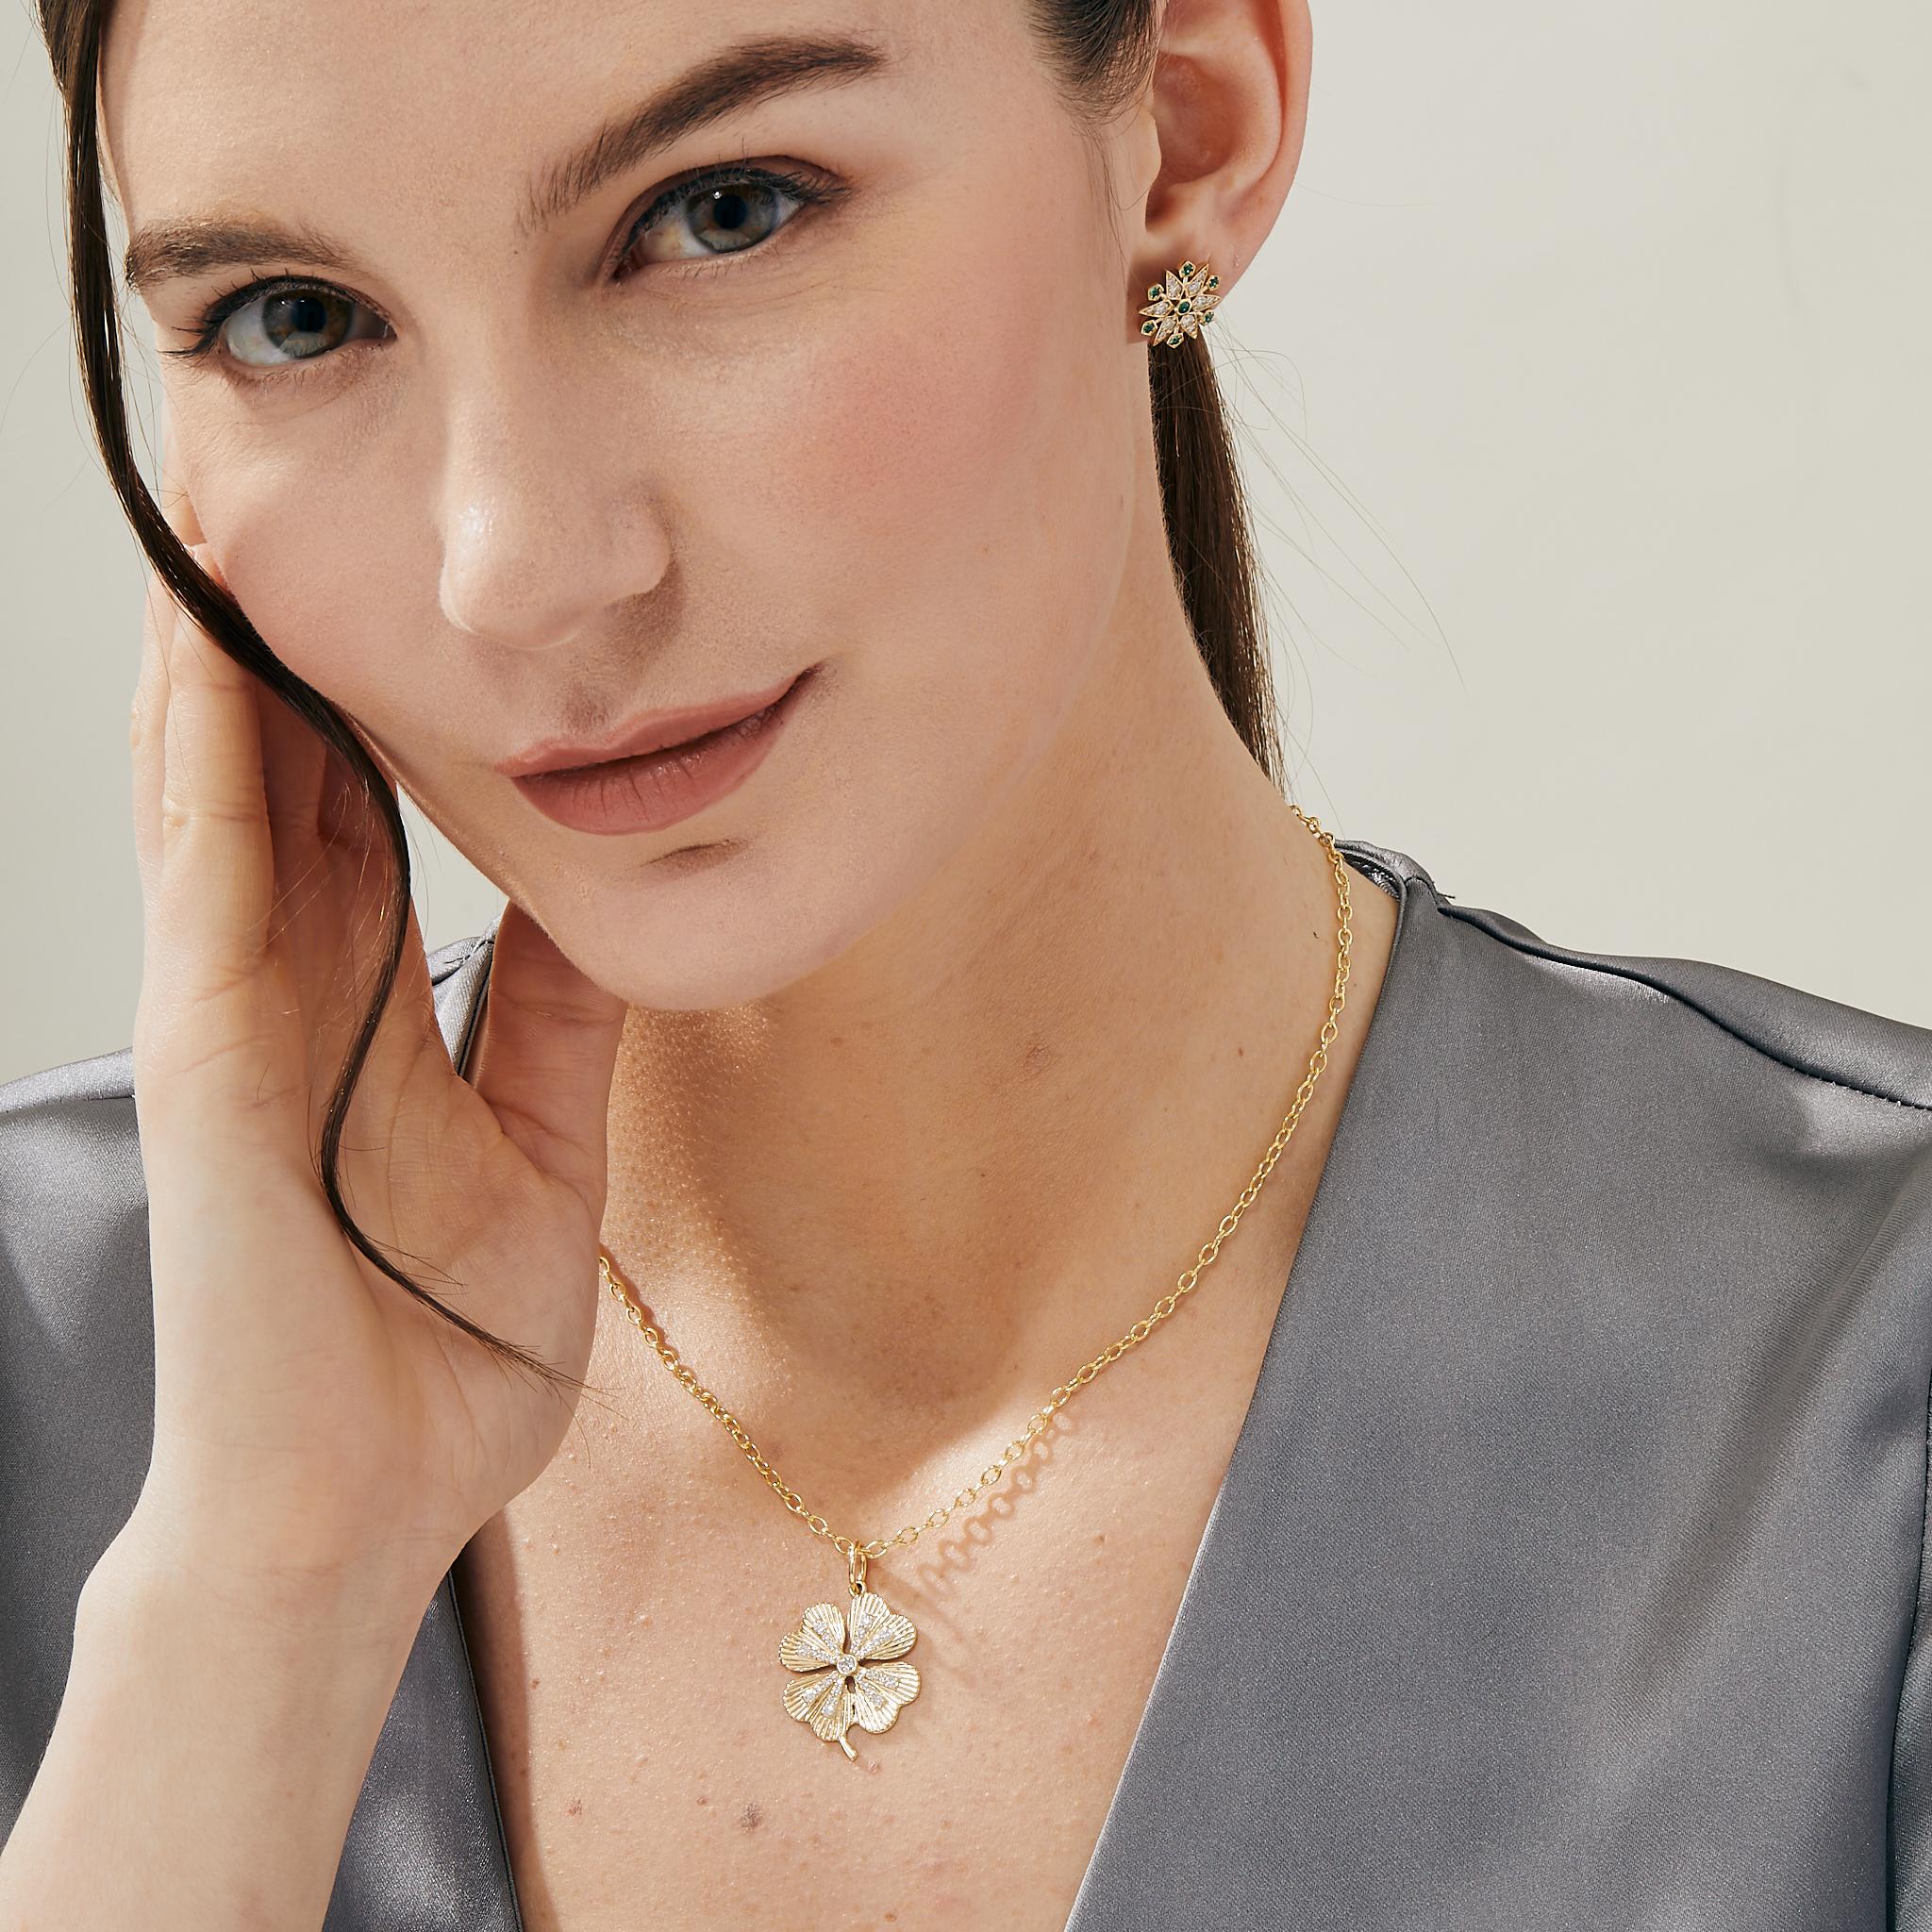 Created in 18 karat yellow gold
Diamonds 0.40 carat approx.
Chain sold separately
Limited Edition

Exquisitely crafted in 18k yellow gold, this limited-edition pendant features a captivating mother-of-pearl centerpiece of 4.50 carats. Please note